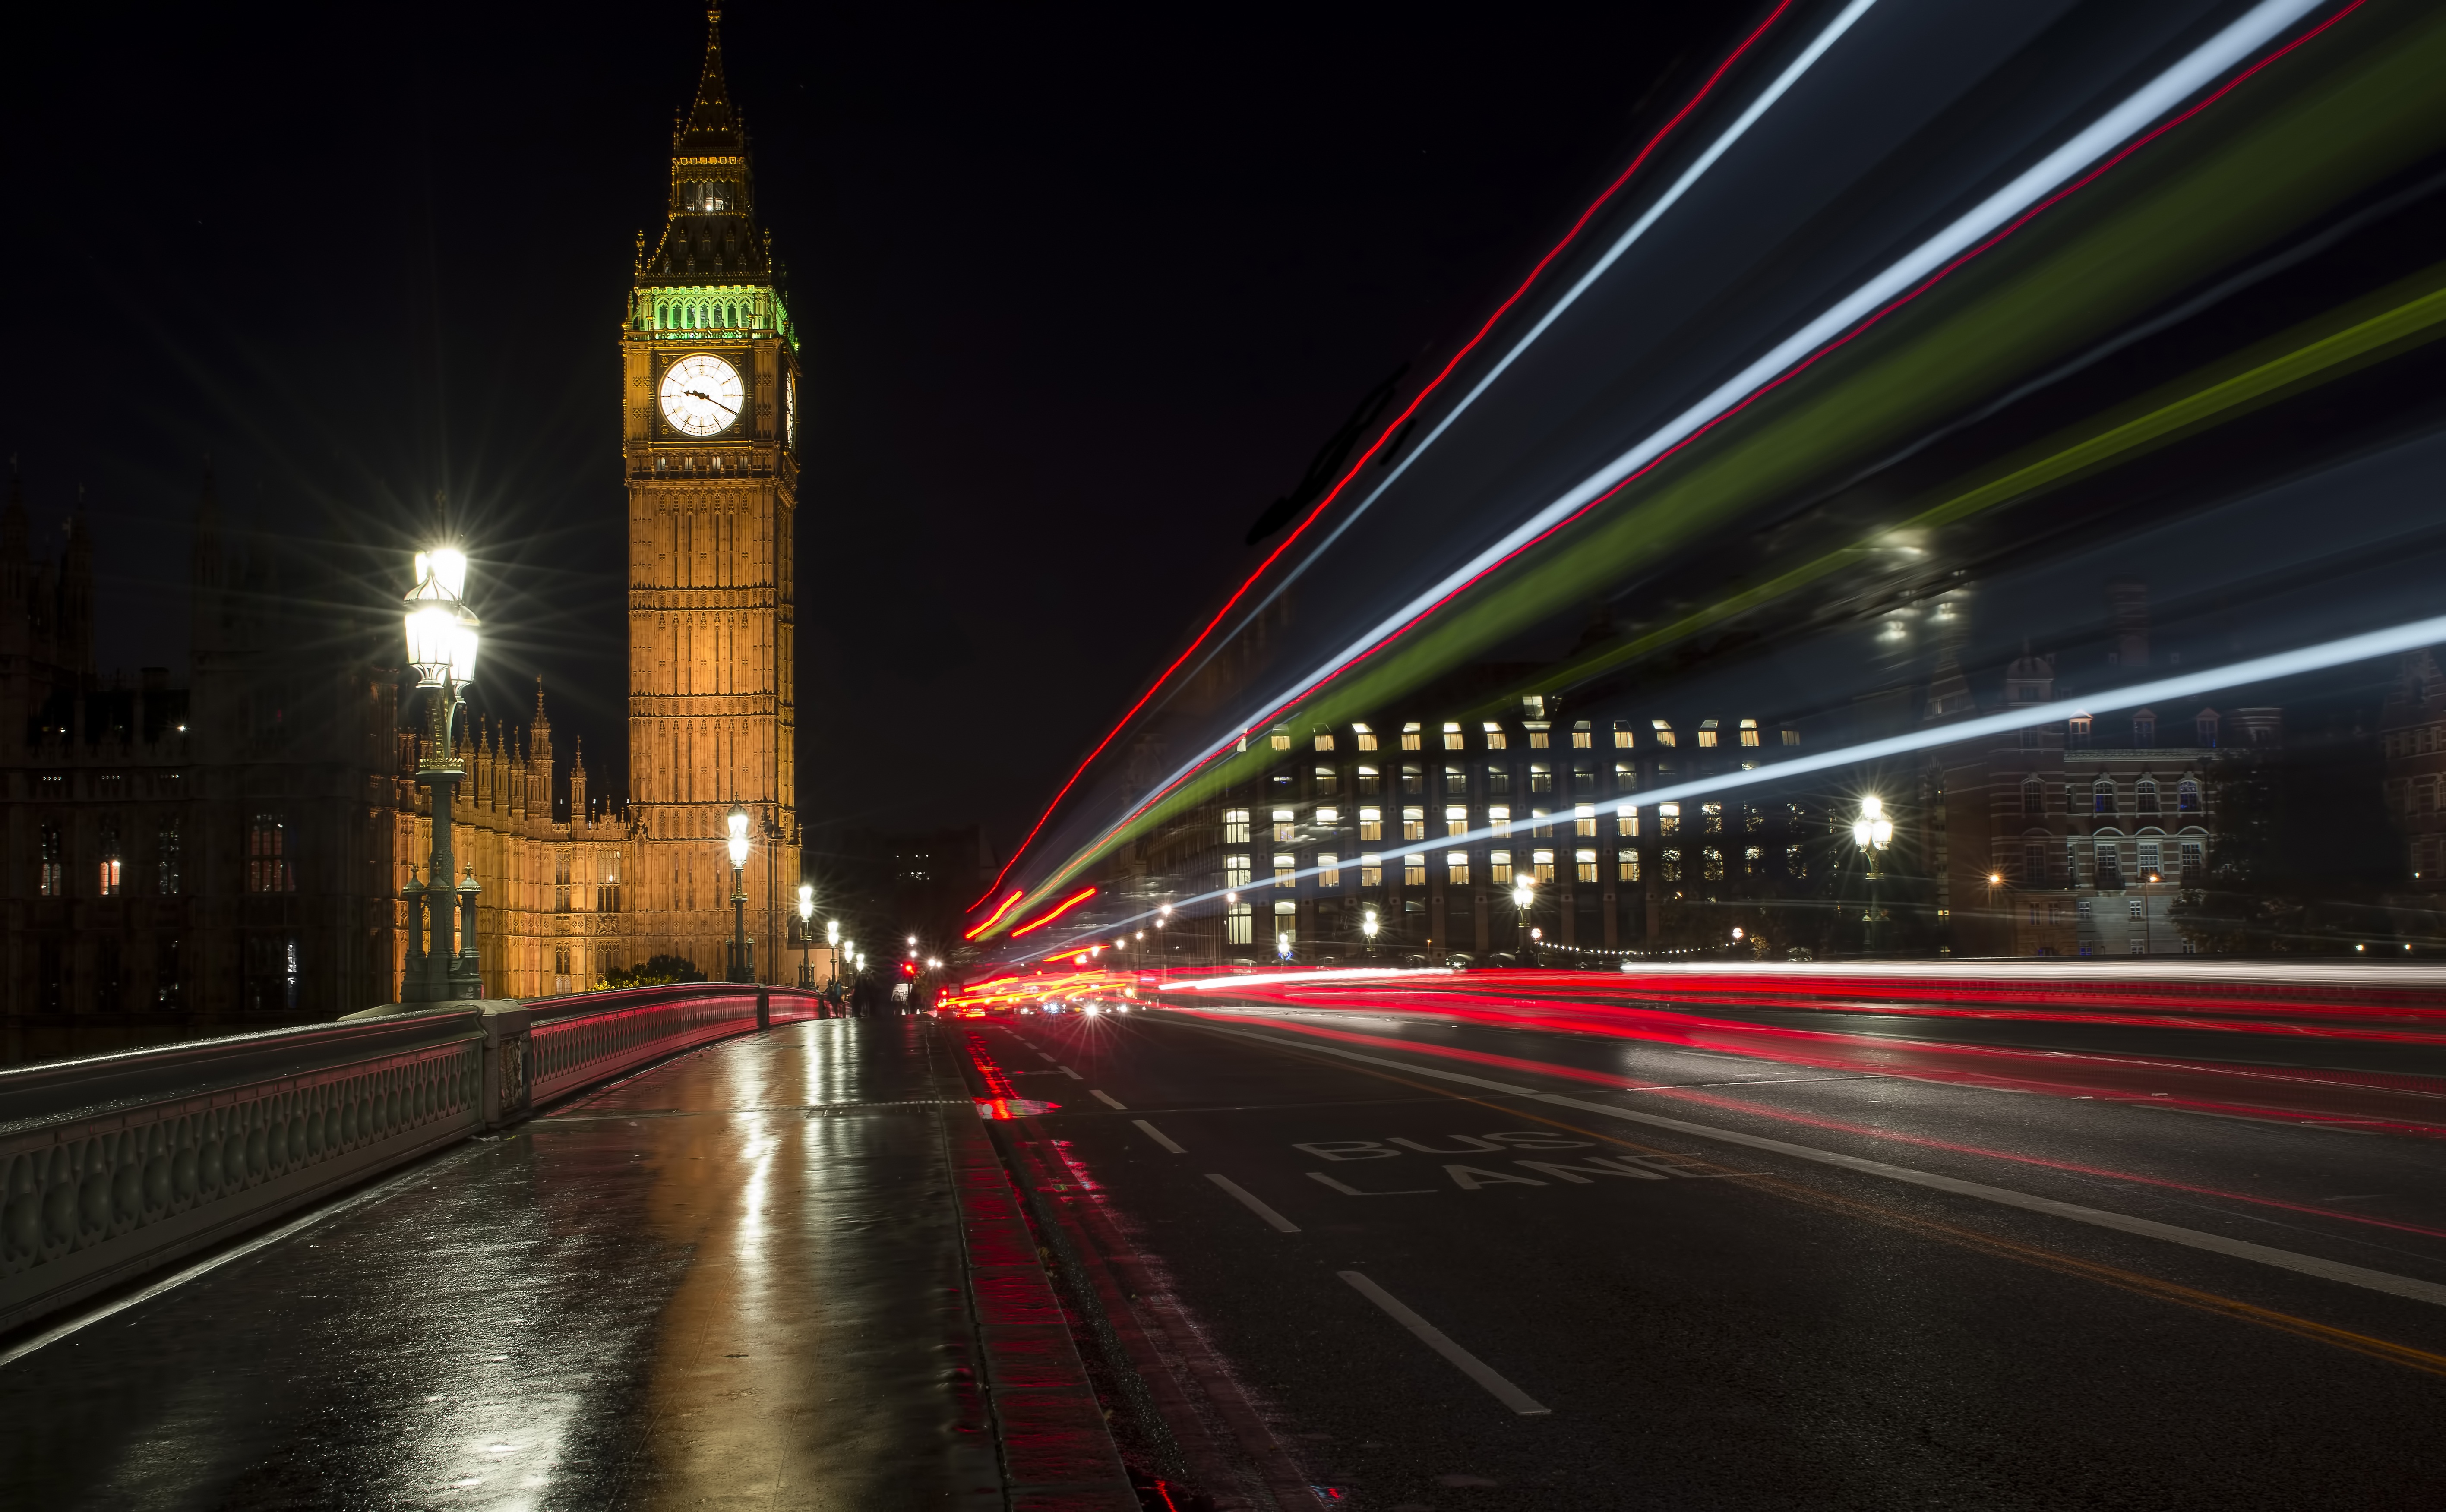 Nighttime photography of Big Ben by Leblancdesign